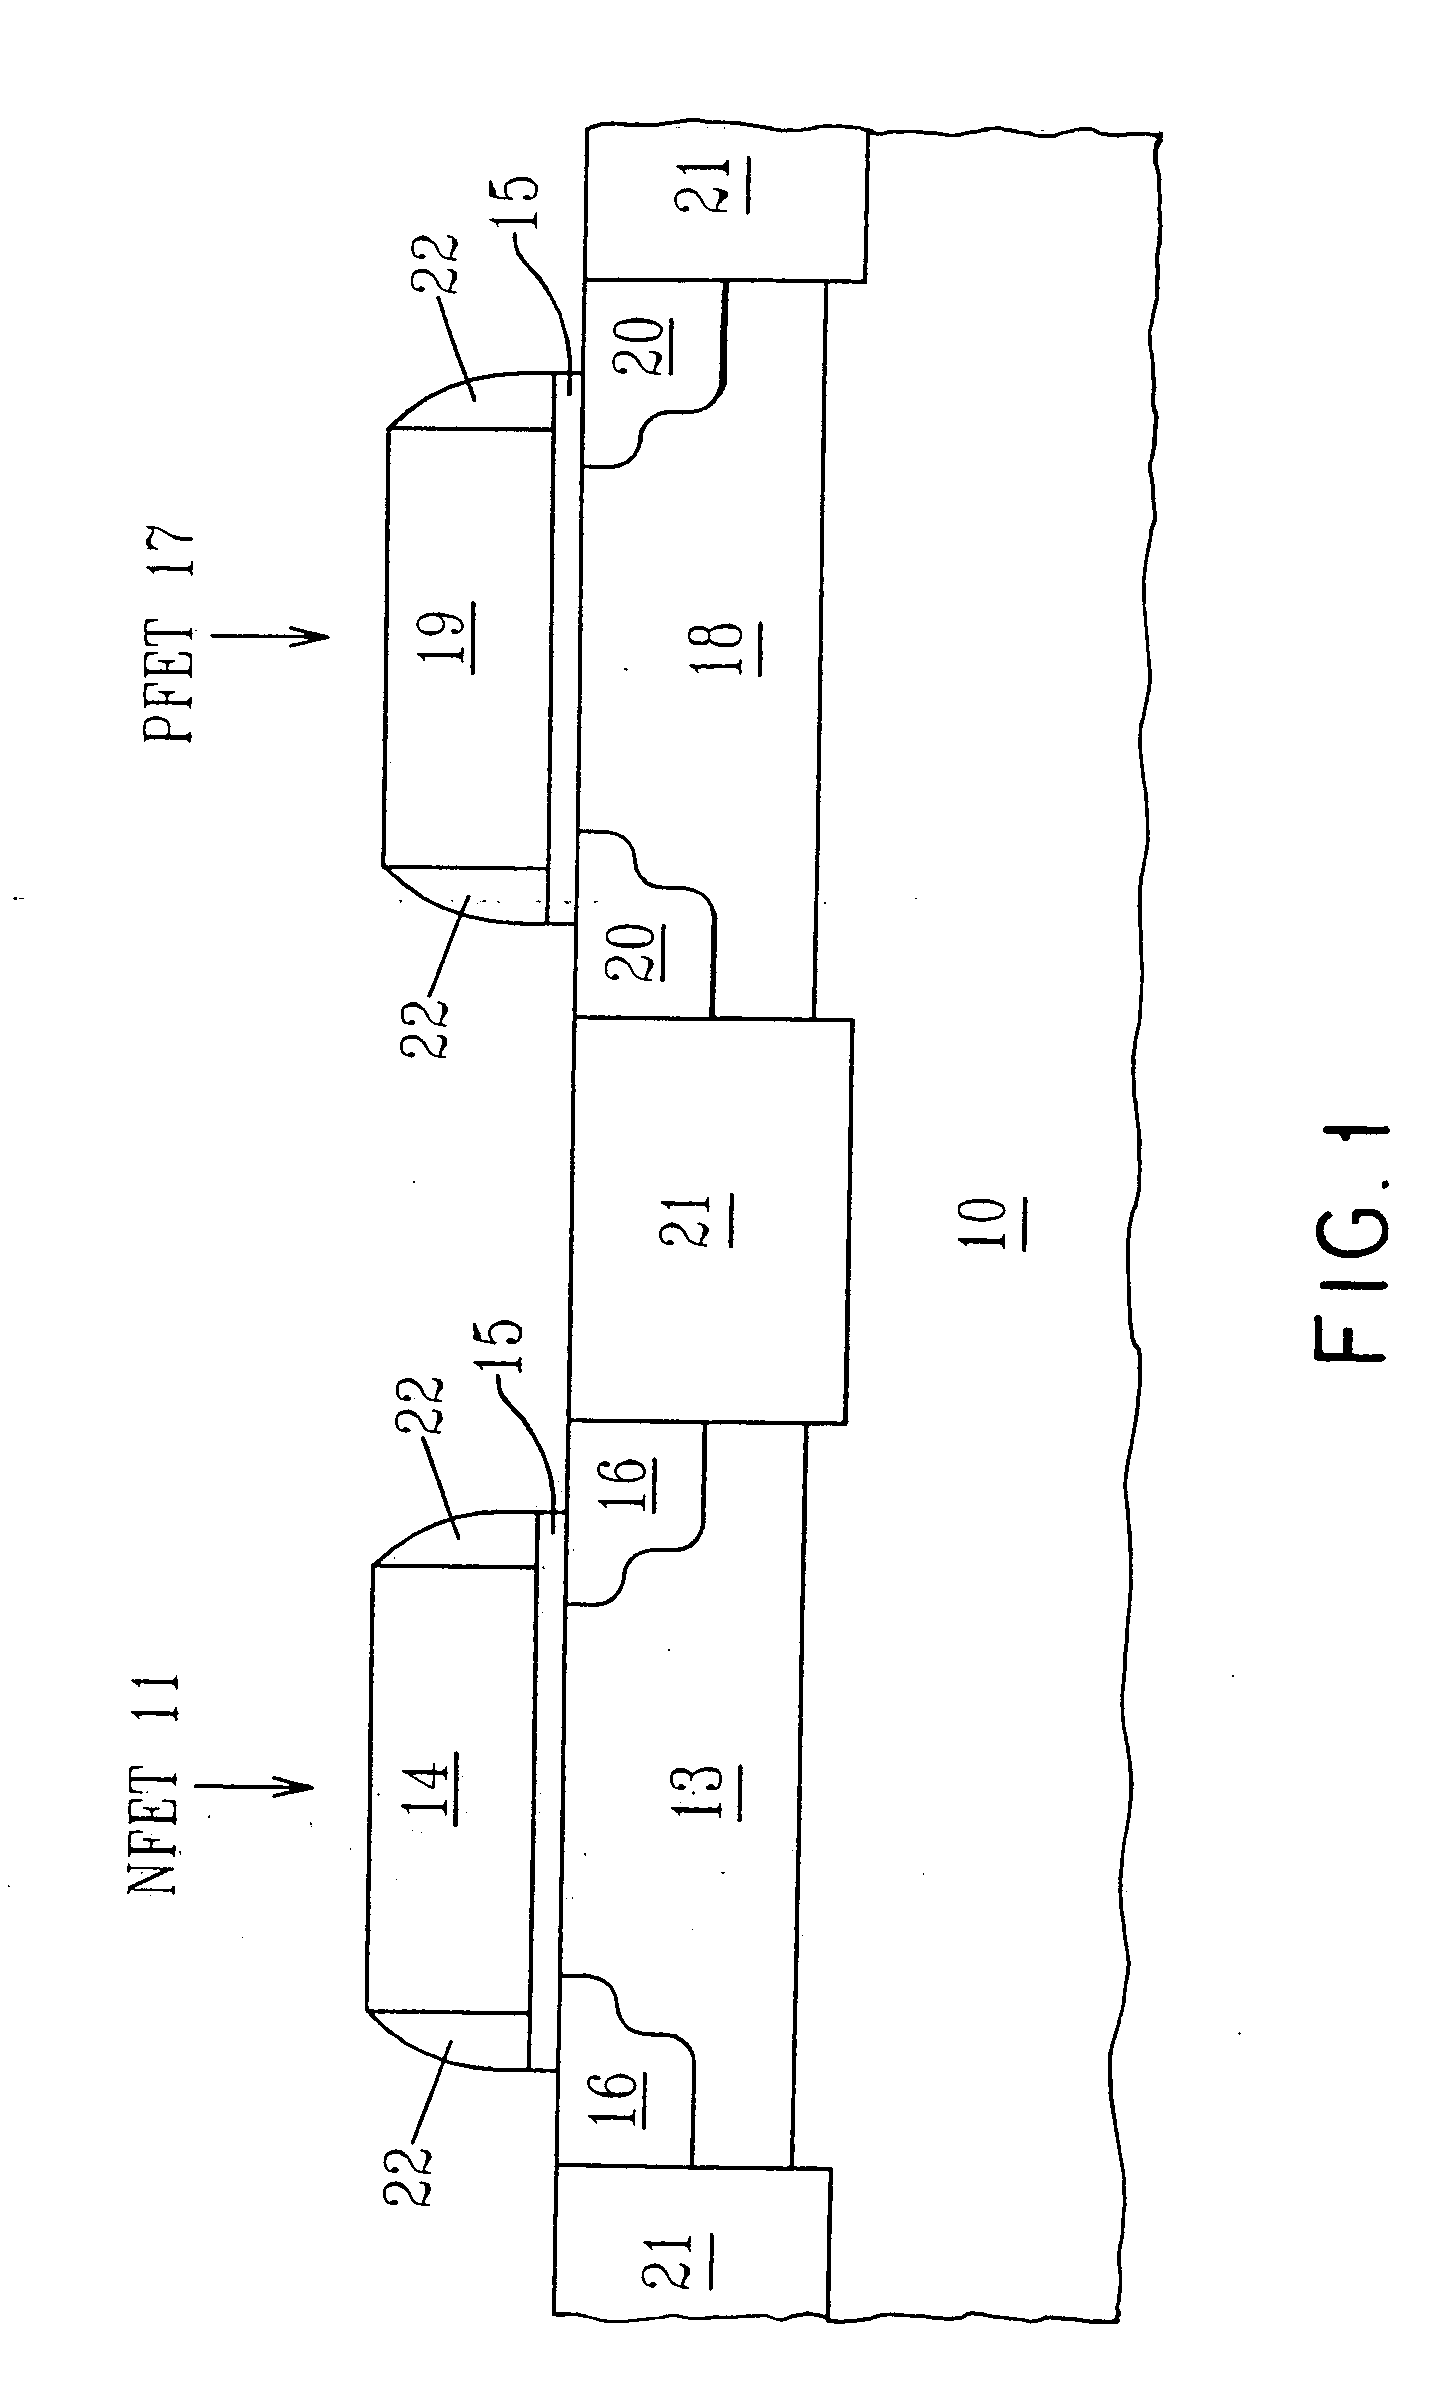 Deposition of hafnium oxide and/or zirconium oxide and fabrication of passivated electronic structures